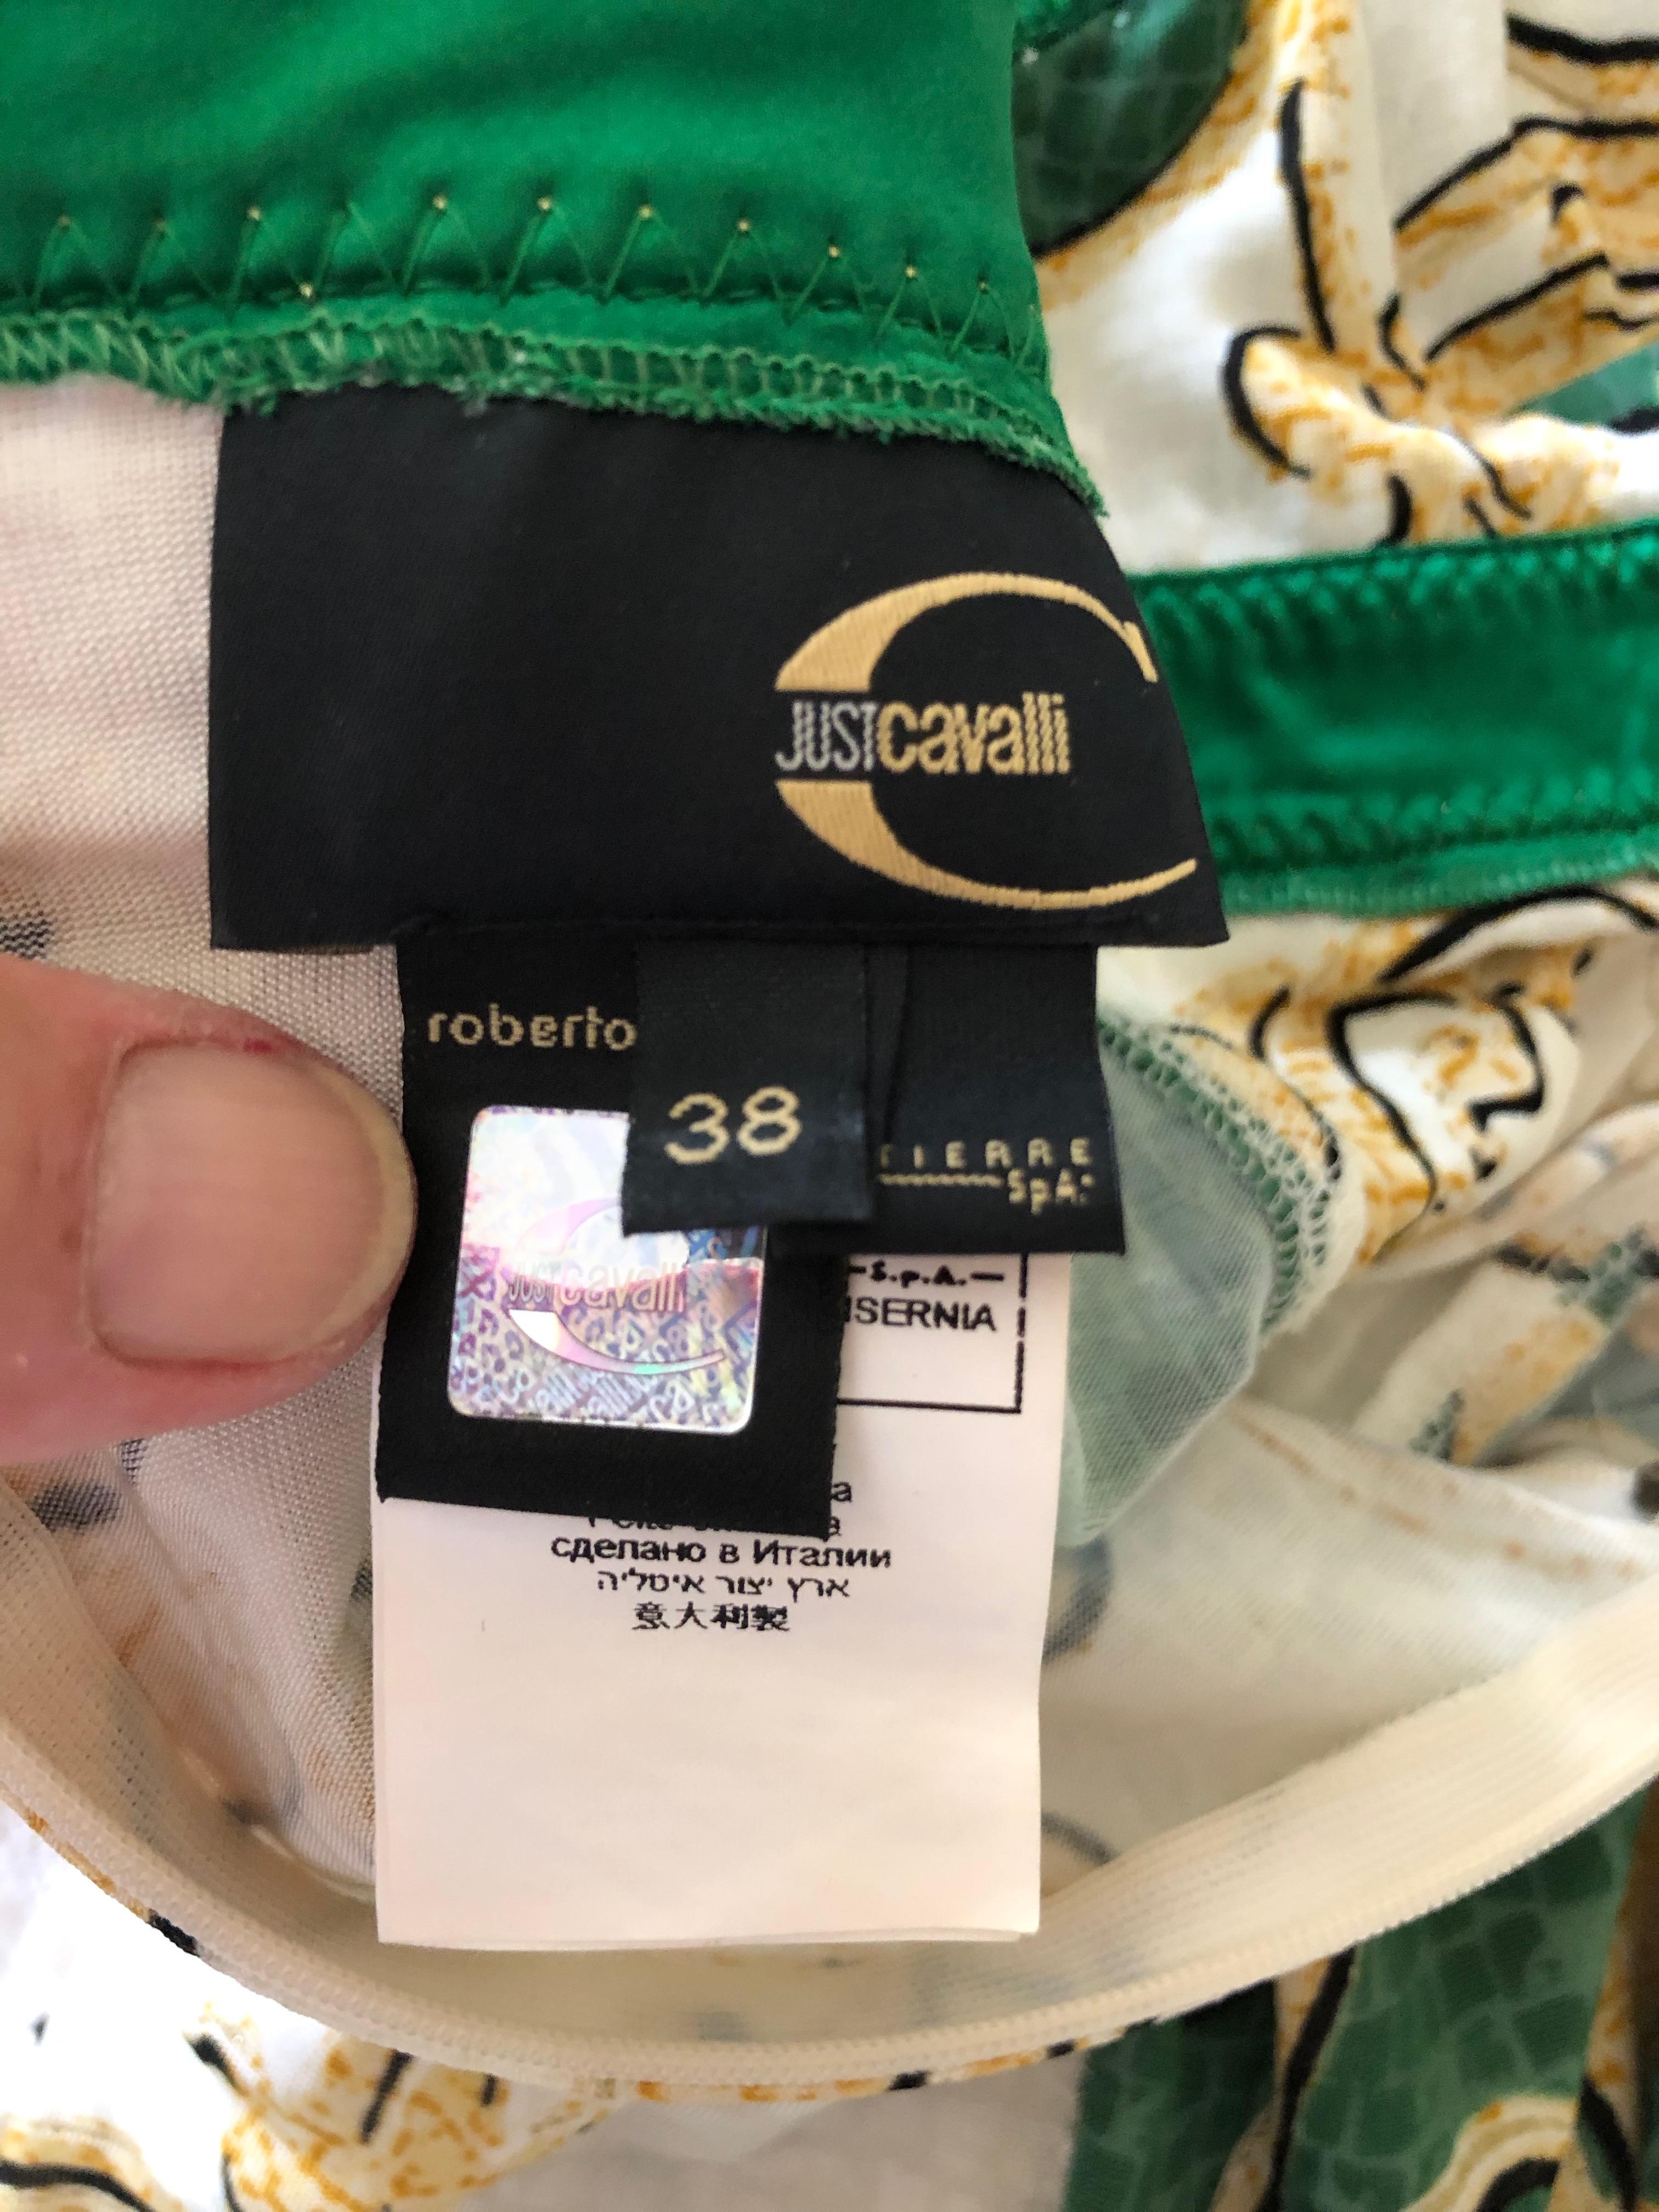 Roberto Cavalli for Just Cavalli Green and Gold Dress with Ruffle Flounce Hem In Excellent Condition For Sale In Cloverdale, CA